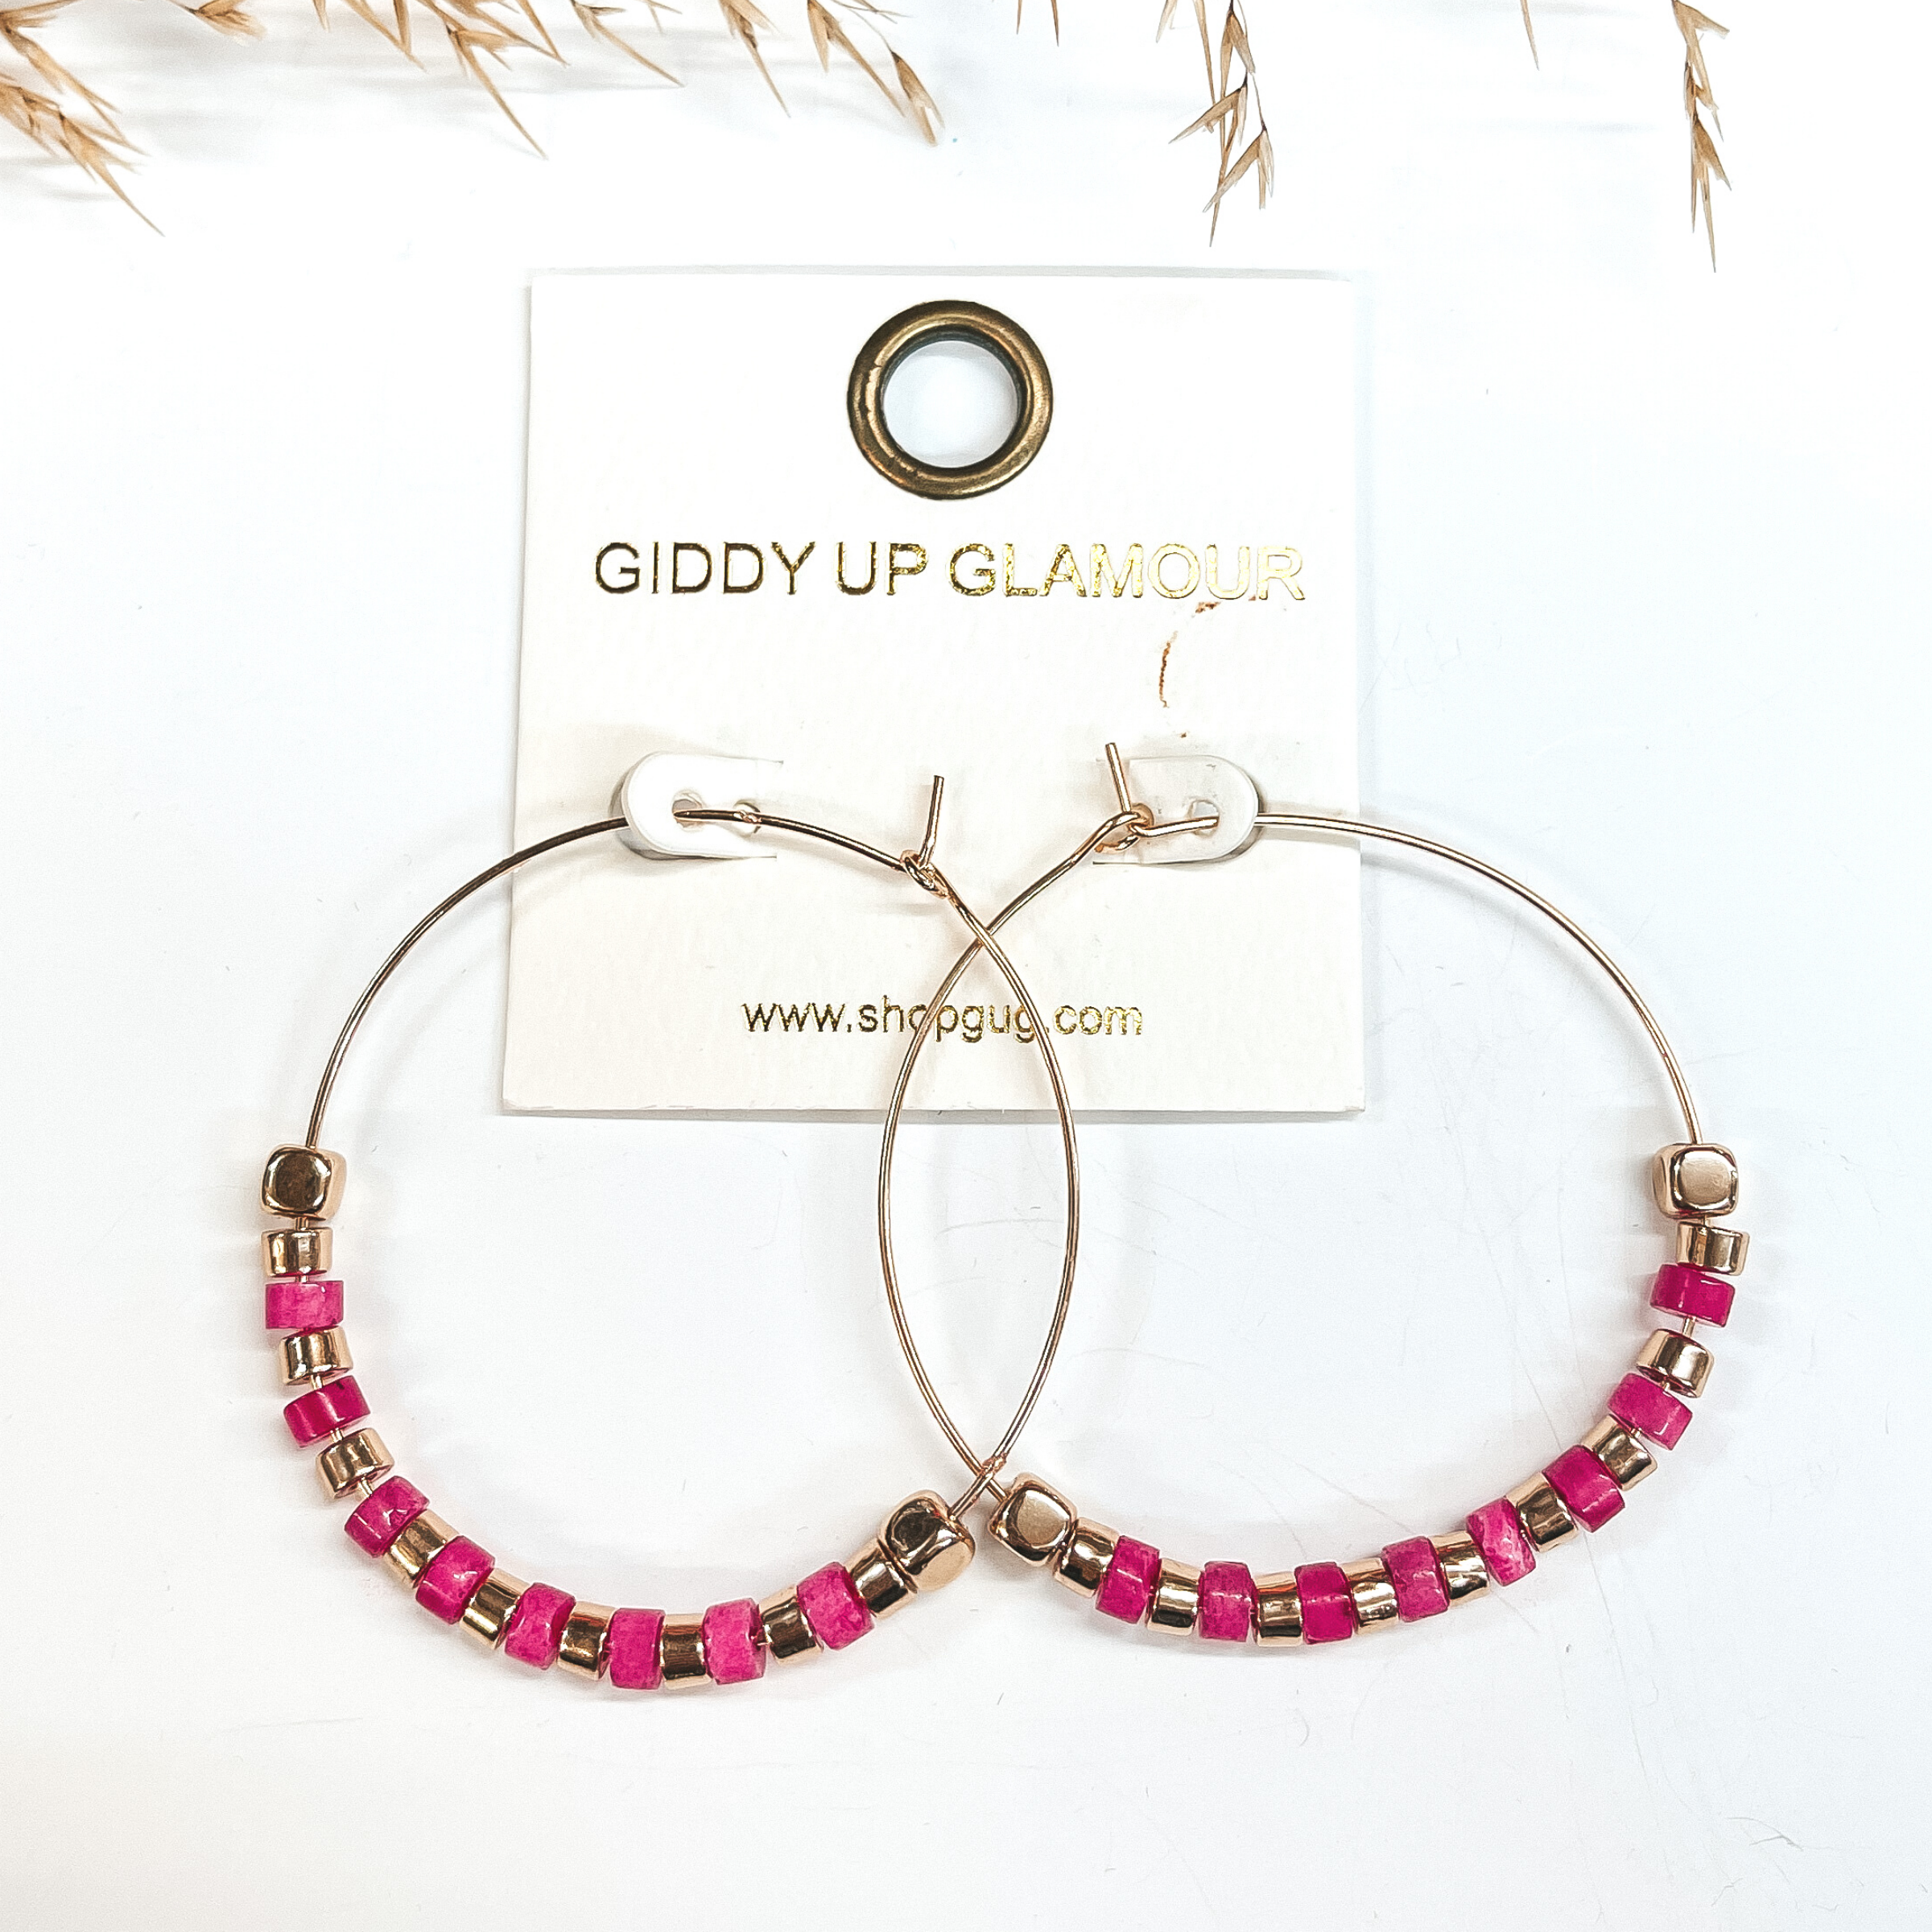 Gold hoops with gold and fuchsia beads, on each end  there is a gold square bead. Taken on a white  background with a brown plant in the back as decor.